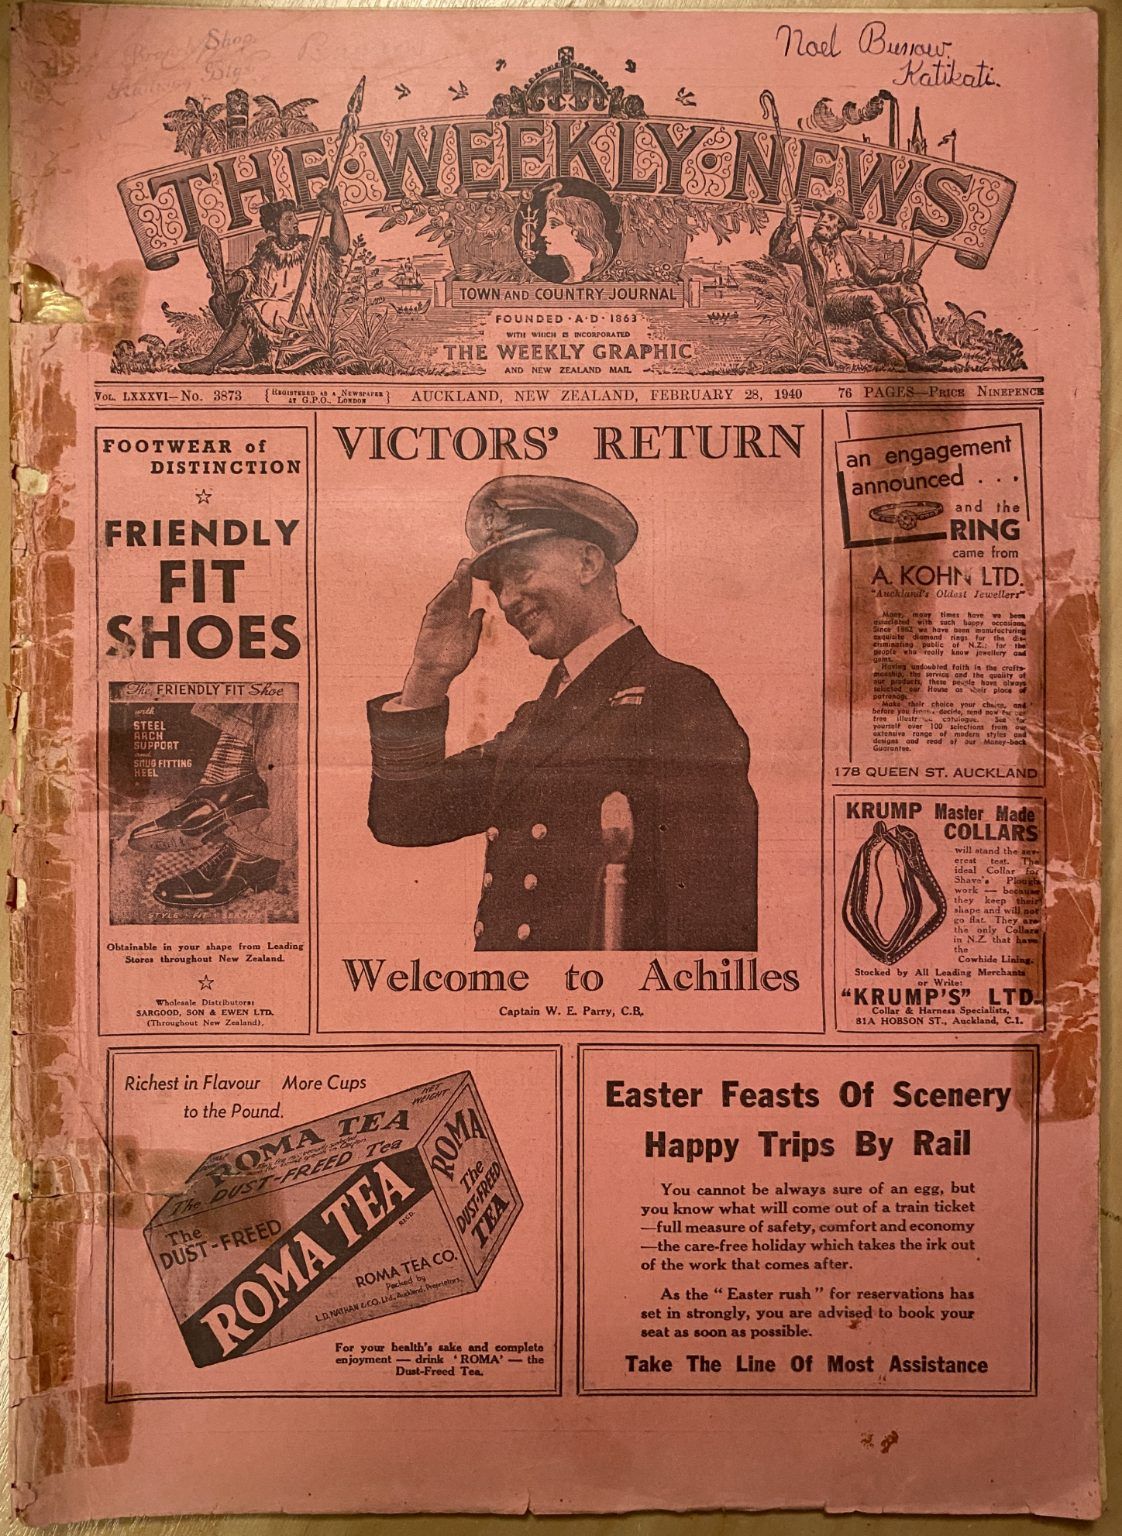 OLD NEWSPAPER: The Weekly News - No. 3873, 28 February 1940